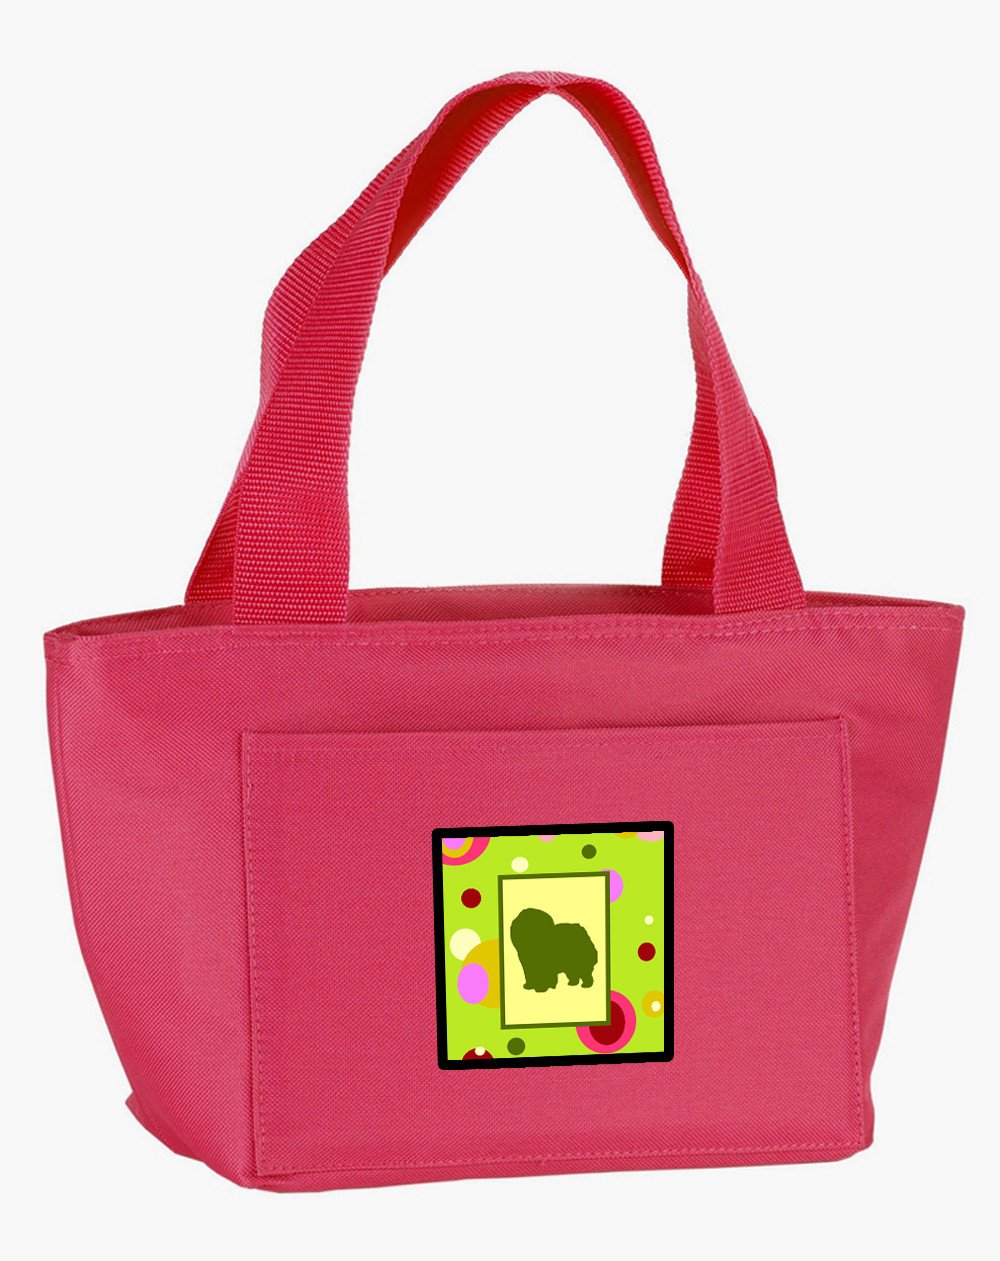 Lime Green Dots Chow Chow Lunch Bag CK1125PK-8808 by Caroline's Treasures